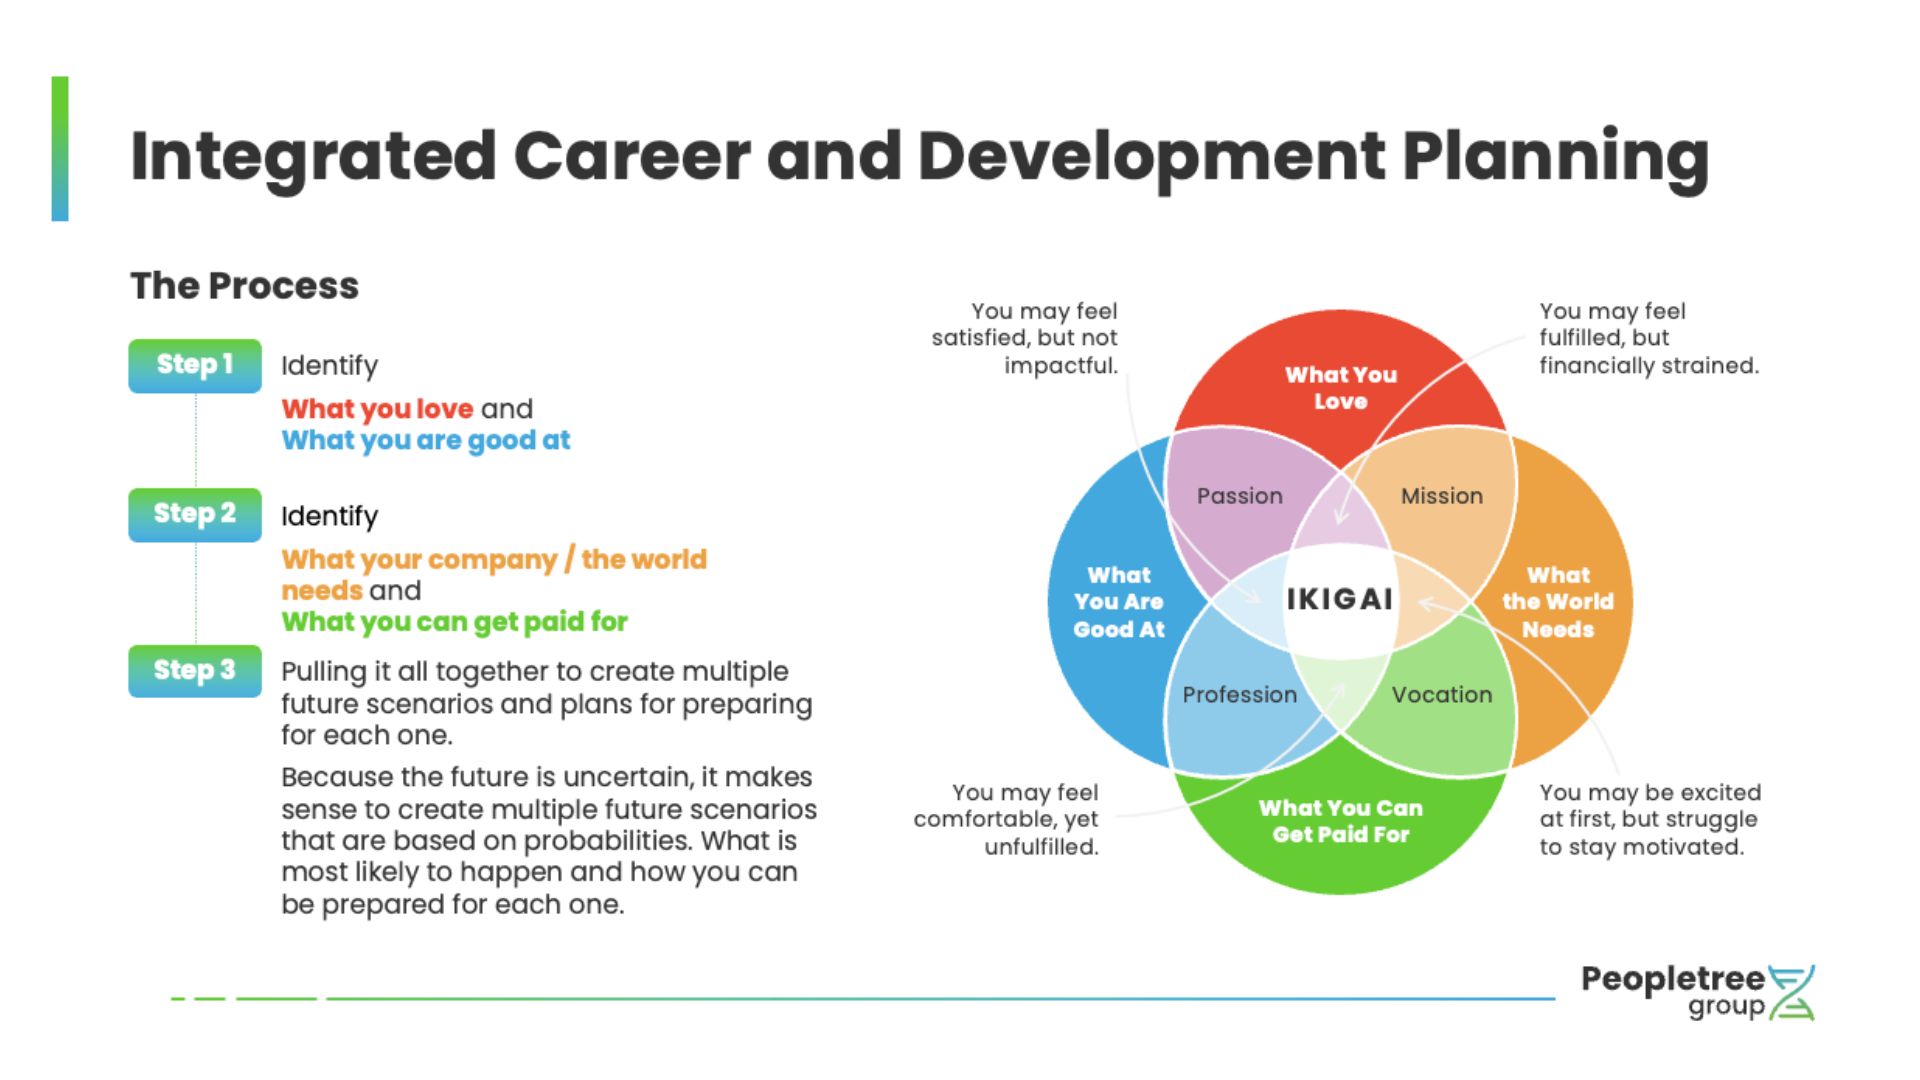 Ikigai diagram intersecting What You Love, What You Are Good At, What the World Needs, and What You Can Get Paid For, illustrating the process of integrated career and development planning.